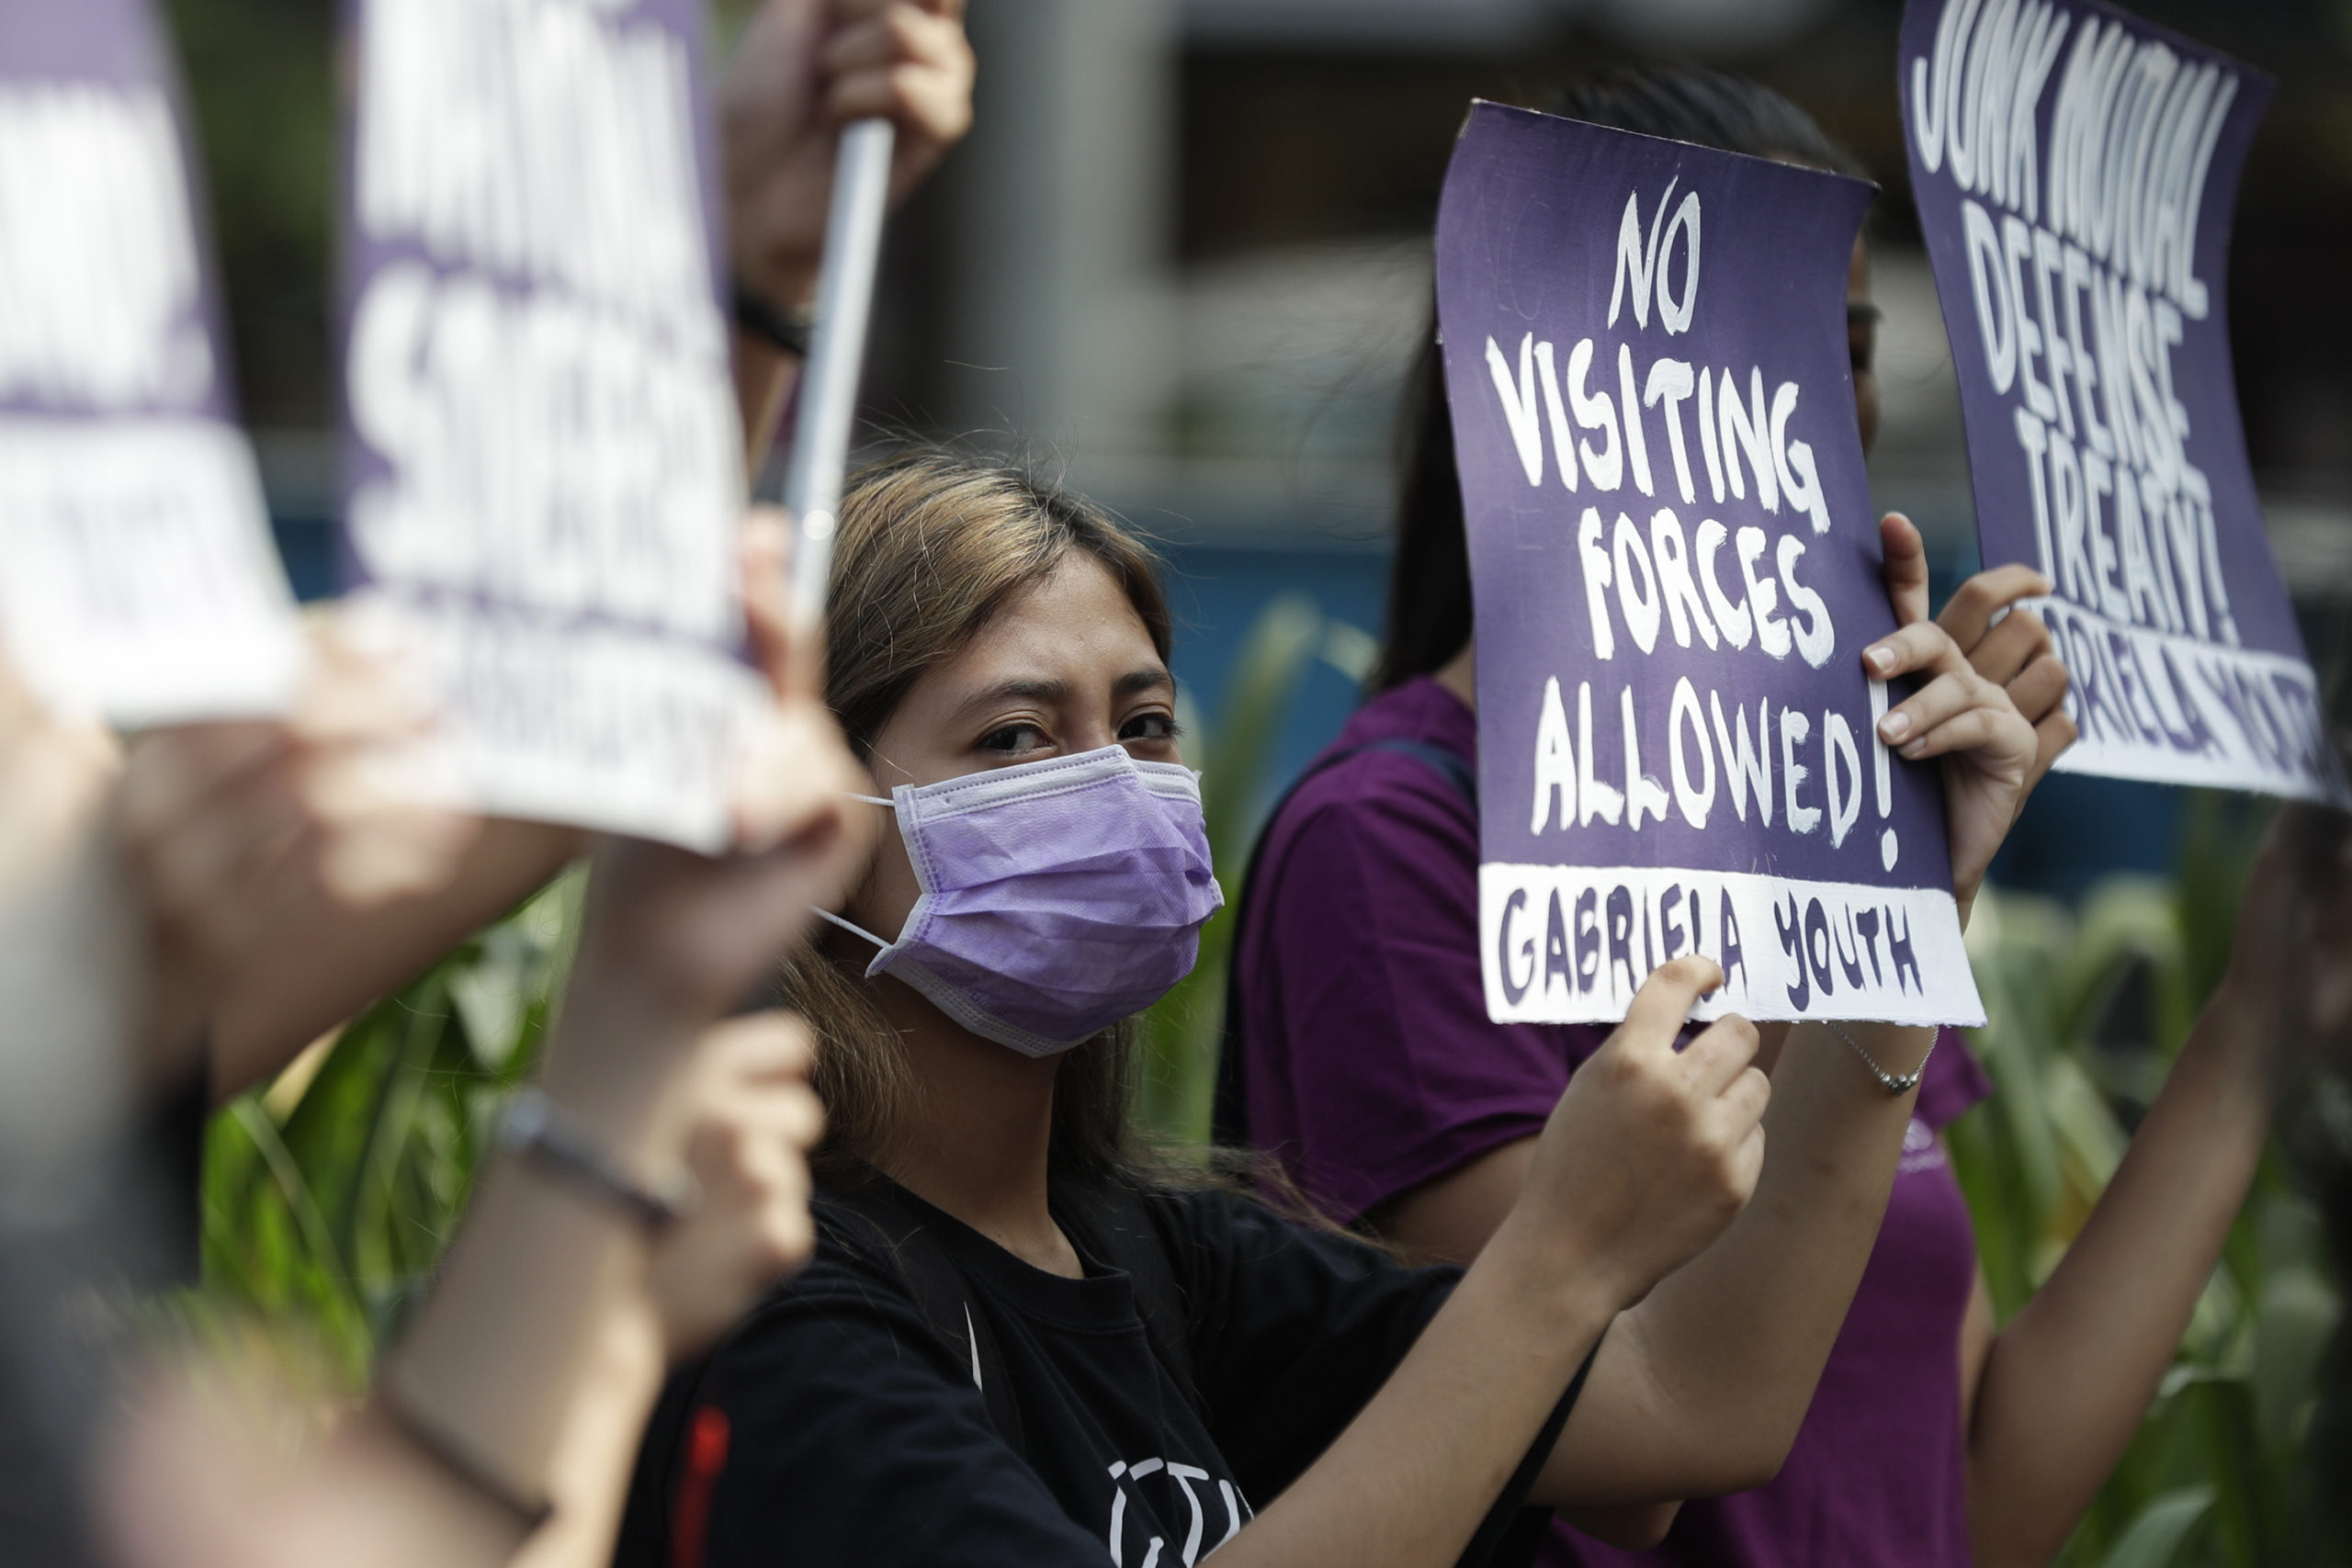 FILE - In this March 6, 2020, file photo, a woman protester wearing a protective mask holds a slogan during a rally outside the U.S. Embassy in Manila, Philippines against the planned military exercises between the Philippines and US under the Visiting Forces Agreement. The Philippines has decided not to suspend a defense pact with the U.S., avoiding a major blow to one of America’s oldest alliances in Asia.(AP Photo/Aaron Favila, File)